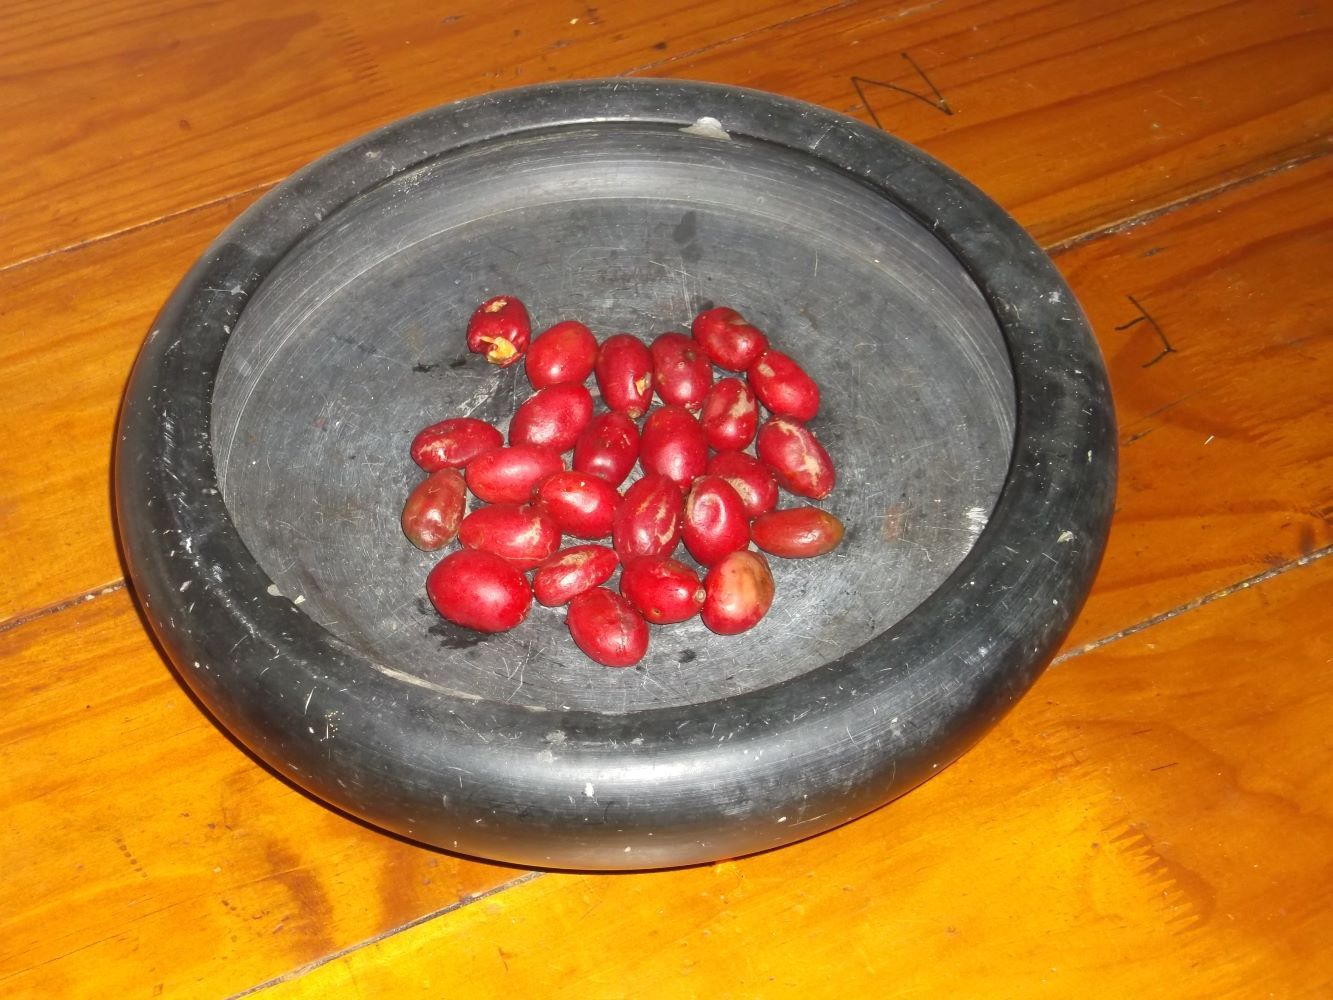 The fruit of the Umgwenyobomvu are incredibly red